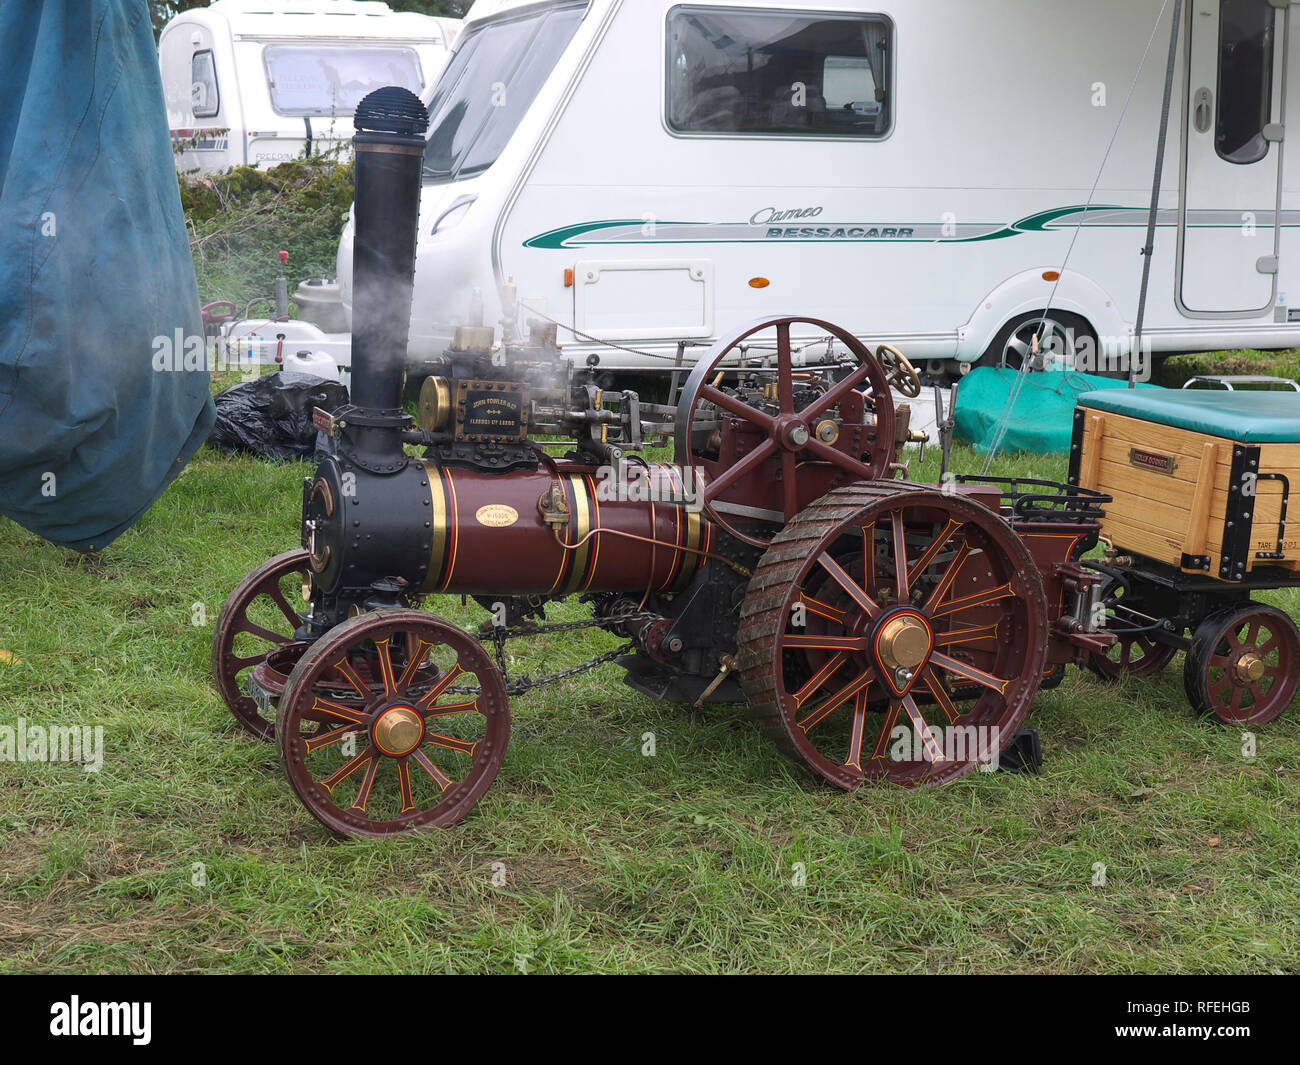 Miniature Traction engine on display at Ashover festival of lights Stock Photo